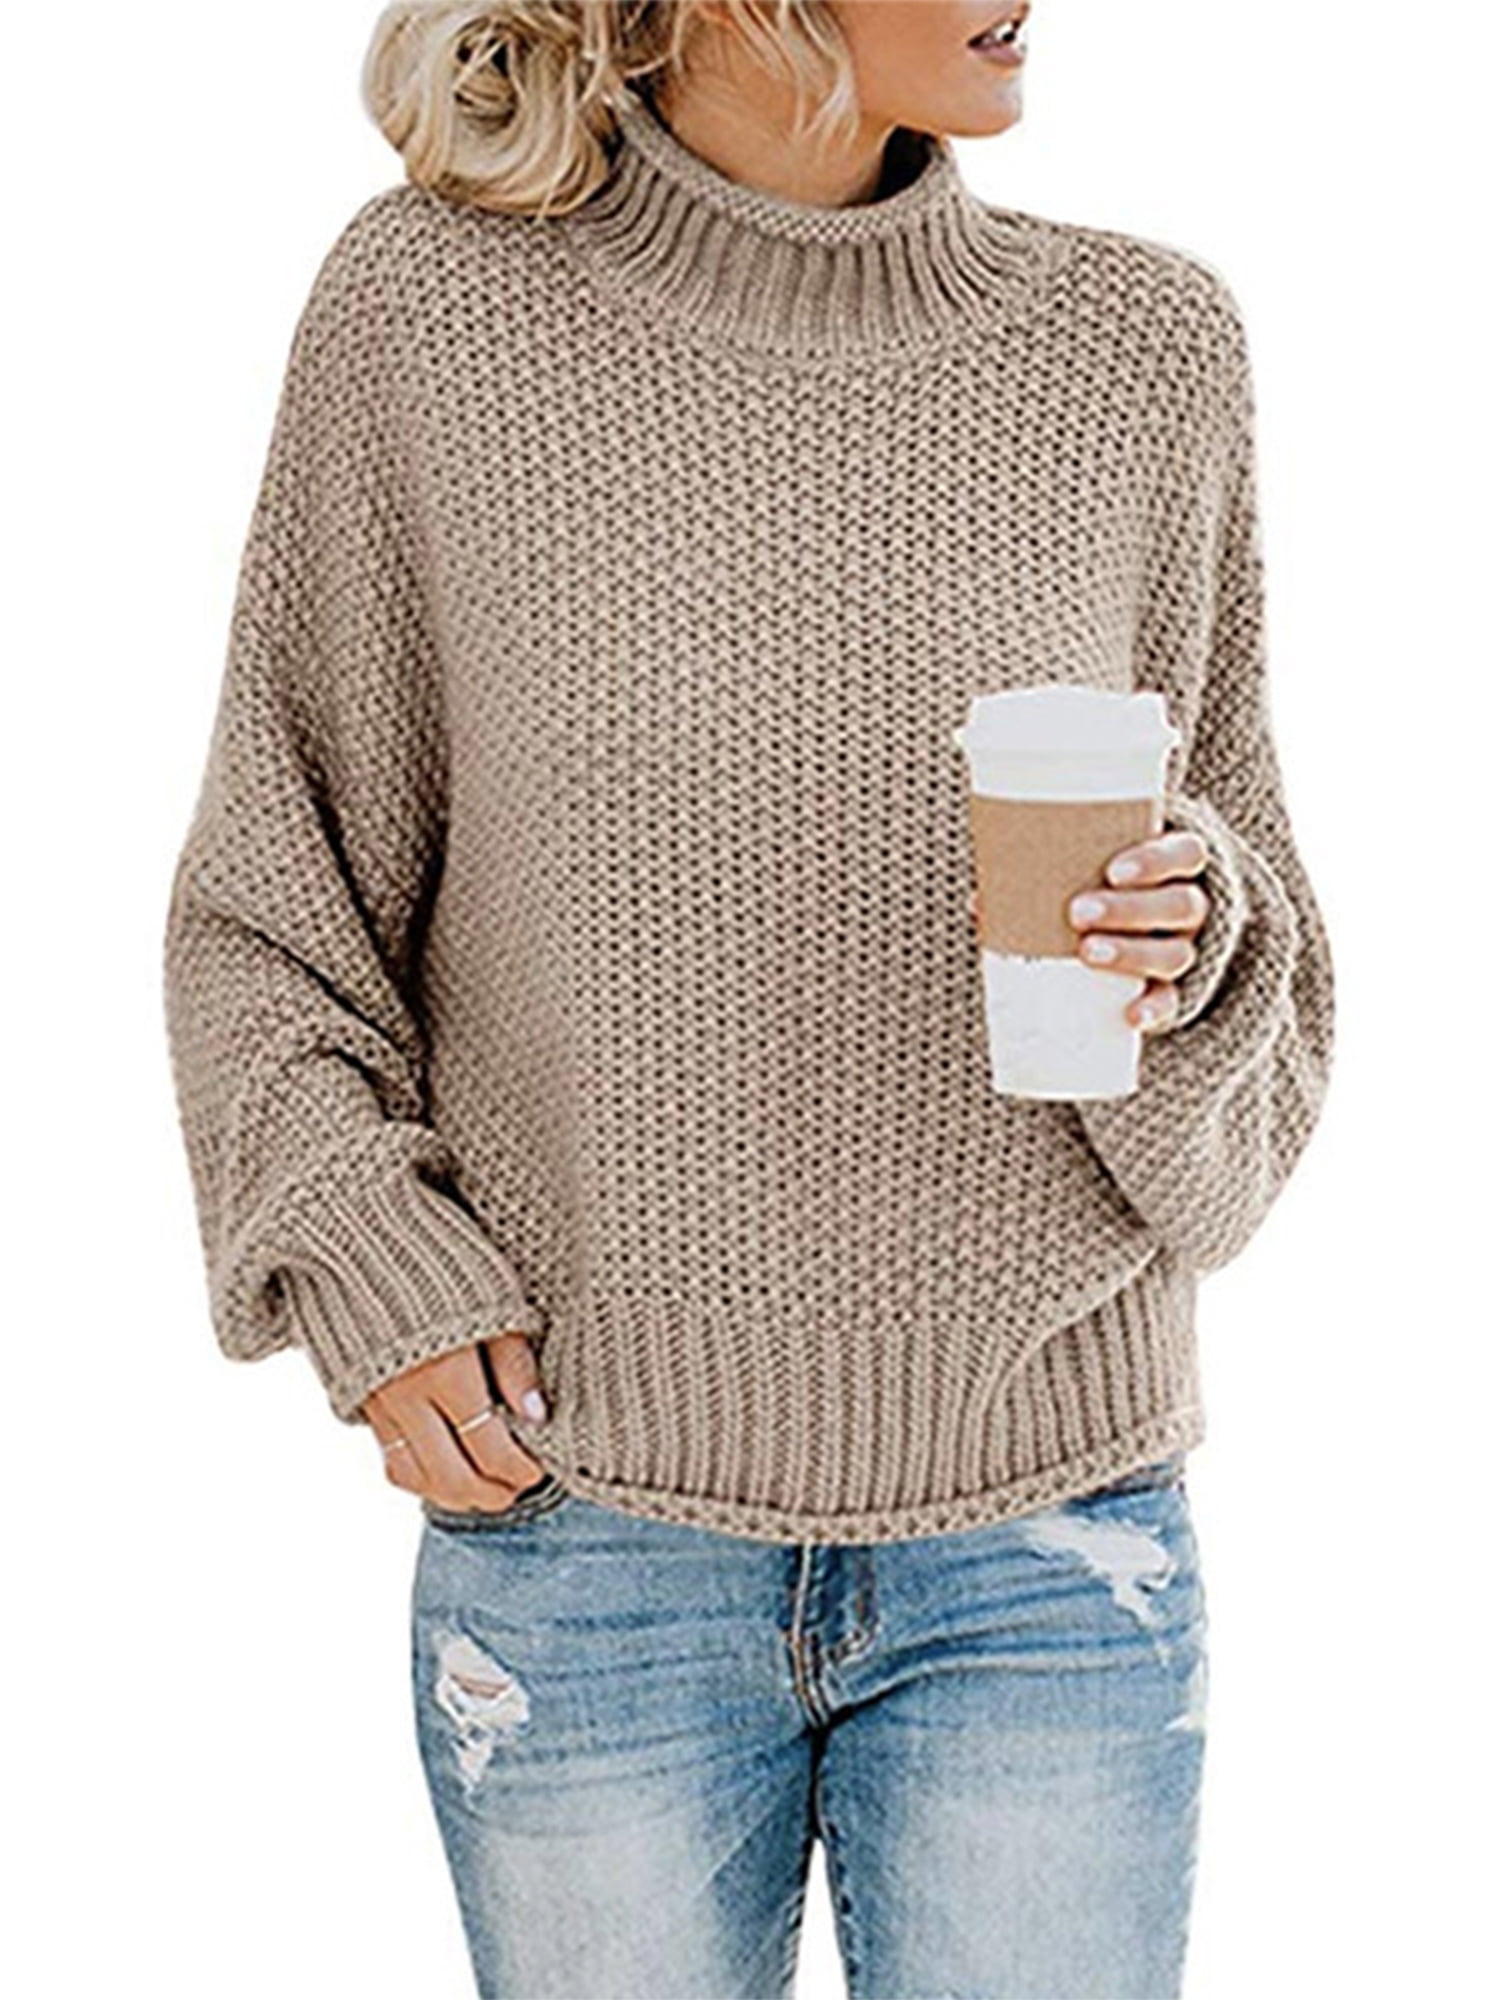 EINCcm Women Long Batwing Sleeve Turtle Cowl Neck Plain Knit Pullover Sweaters Oversized Loose Fit High Low Tunic Tops 